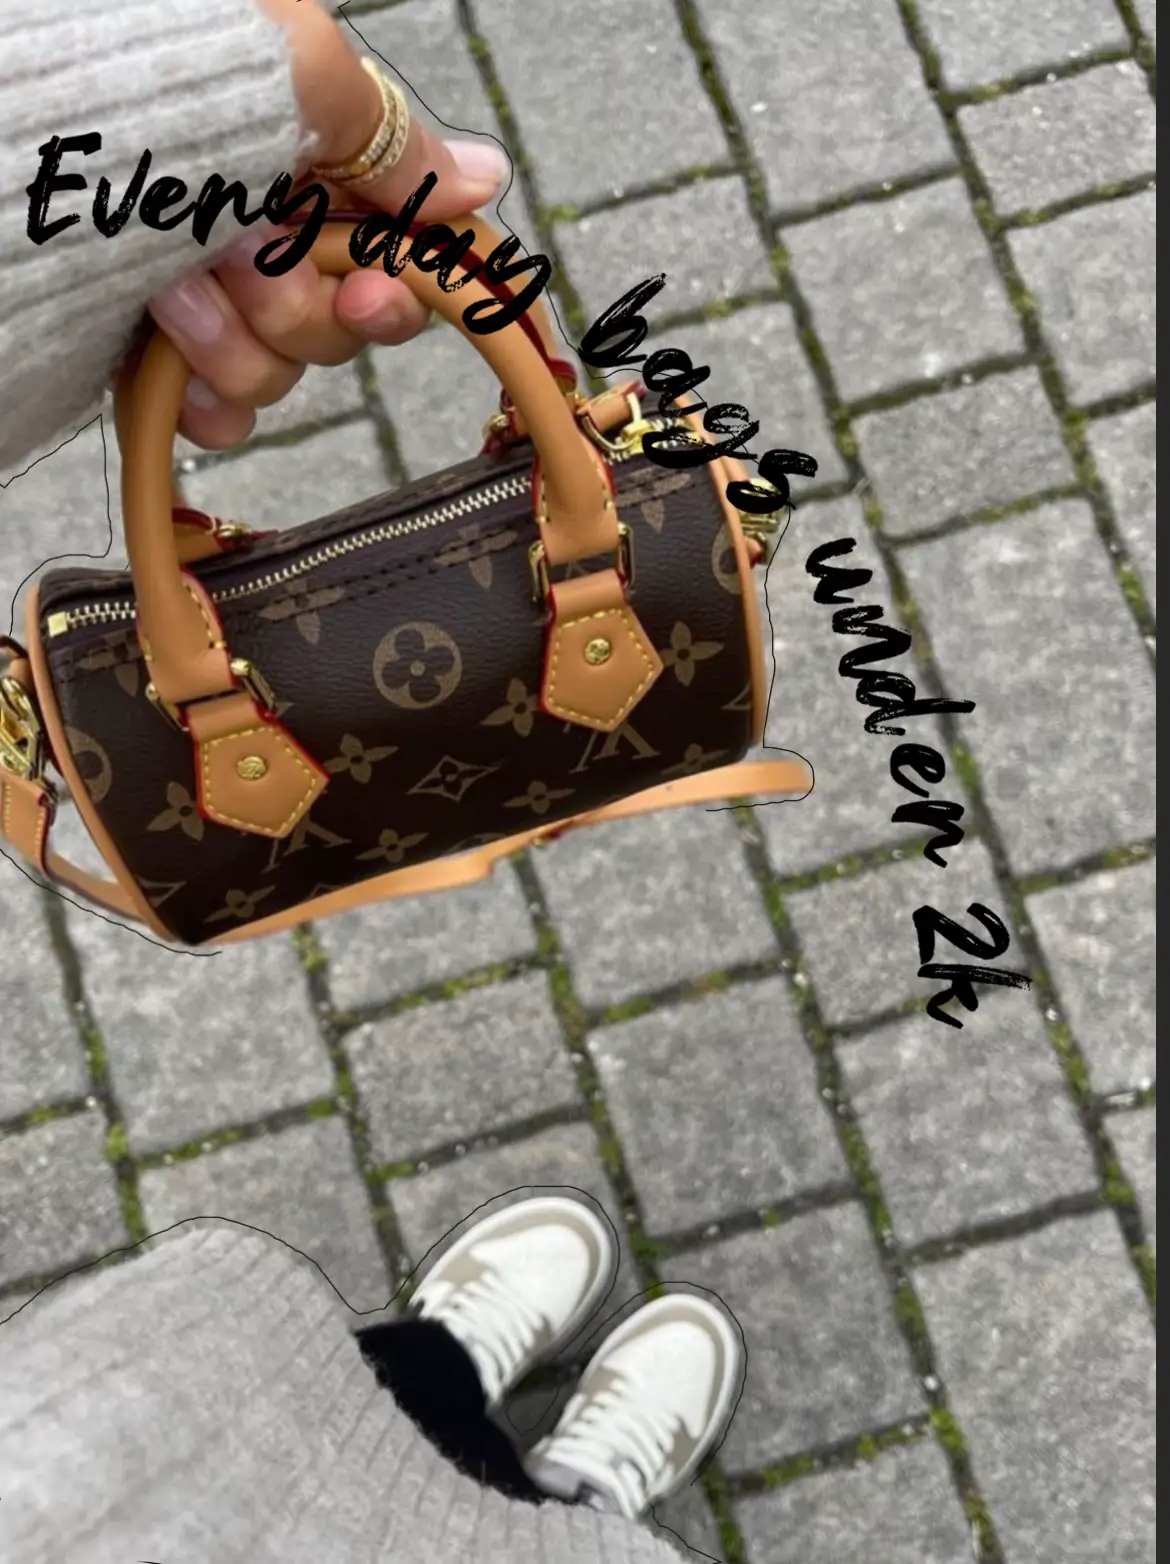 CREPSLOCKER™ on Instagram: “Be sure to check out the Rarest and most  Exclusive keepall bags we have in stock by Louis Vuitton. …